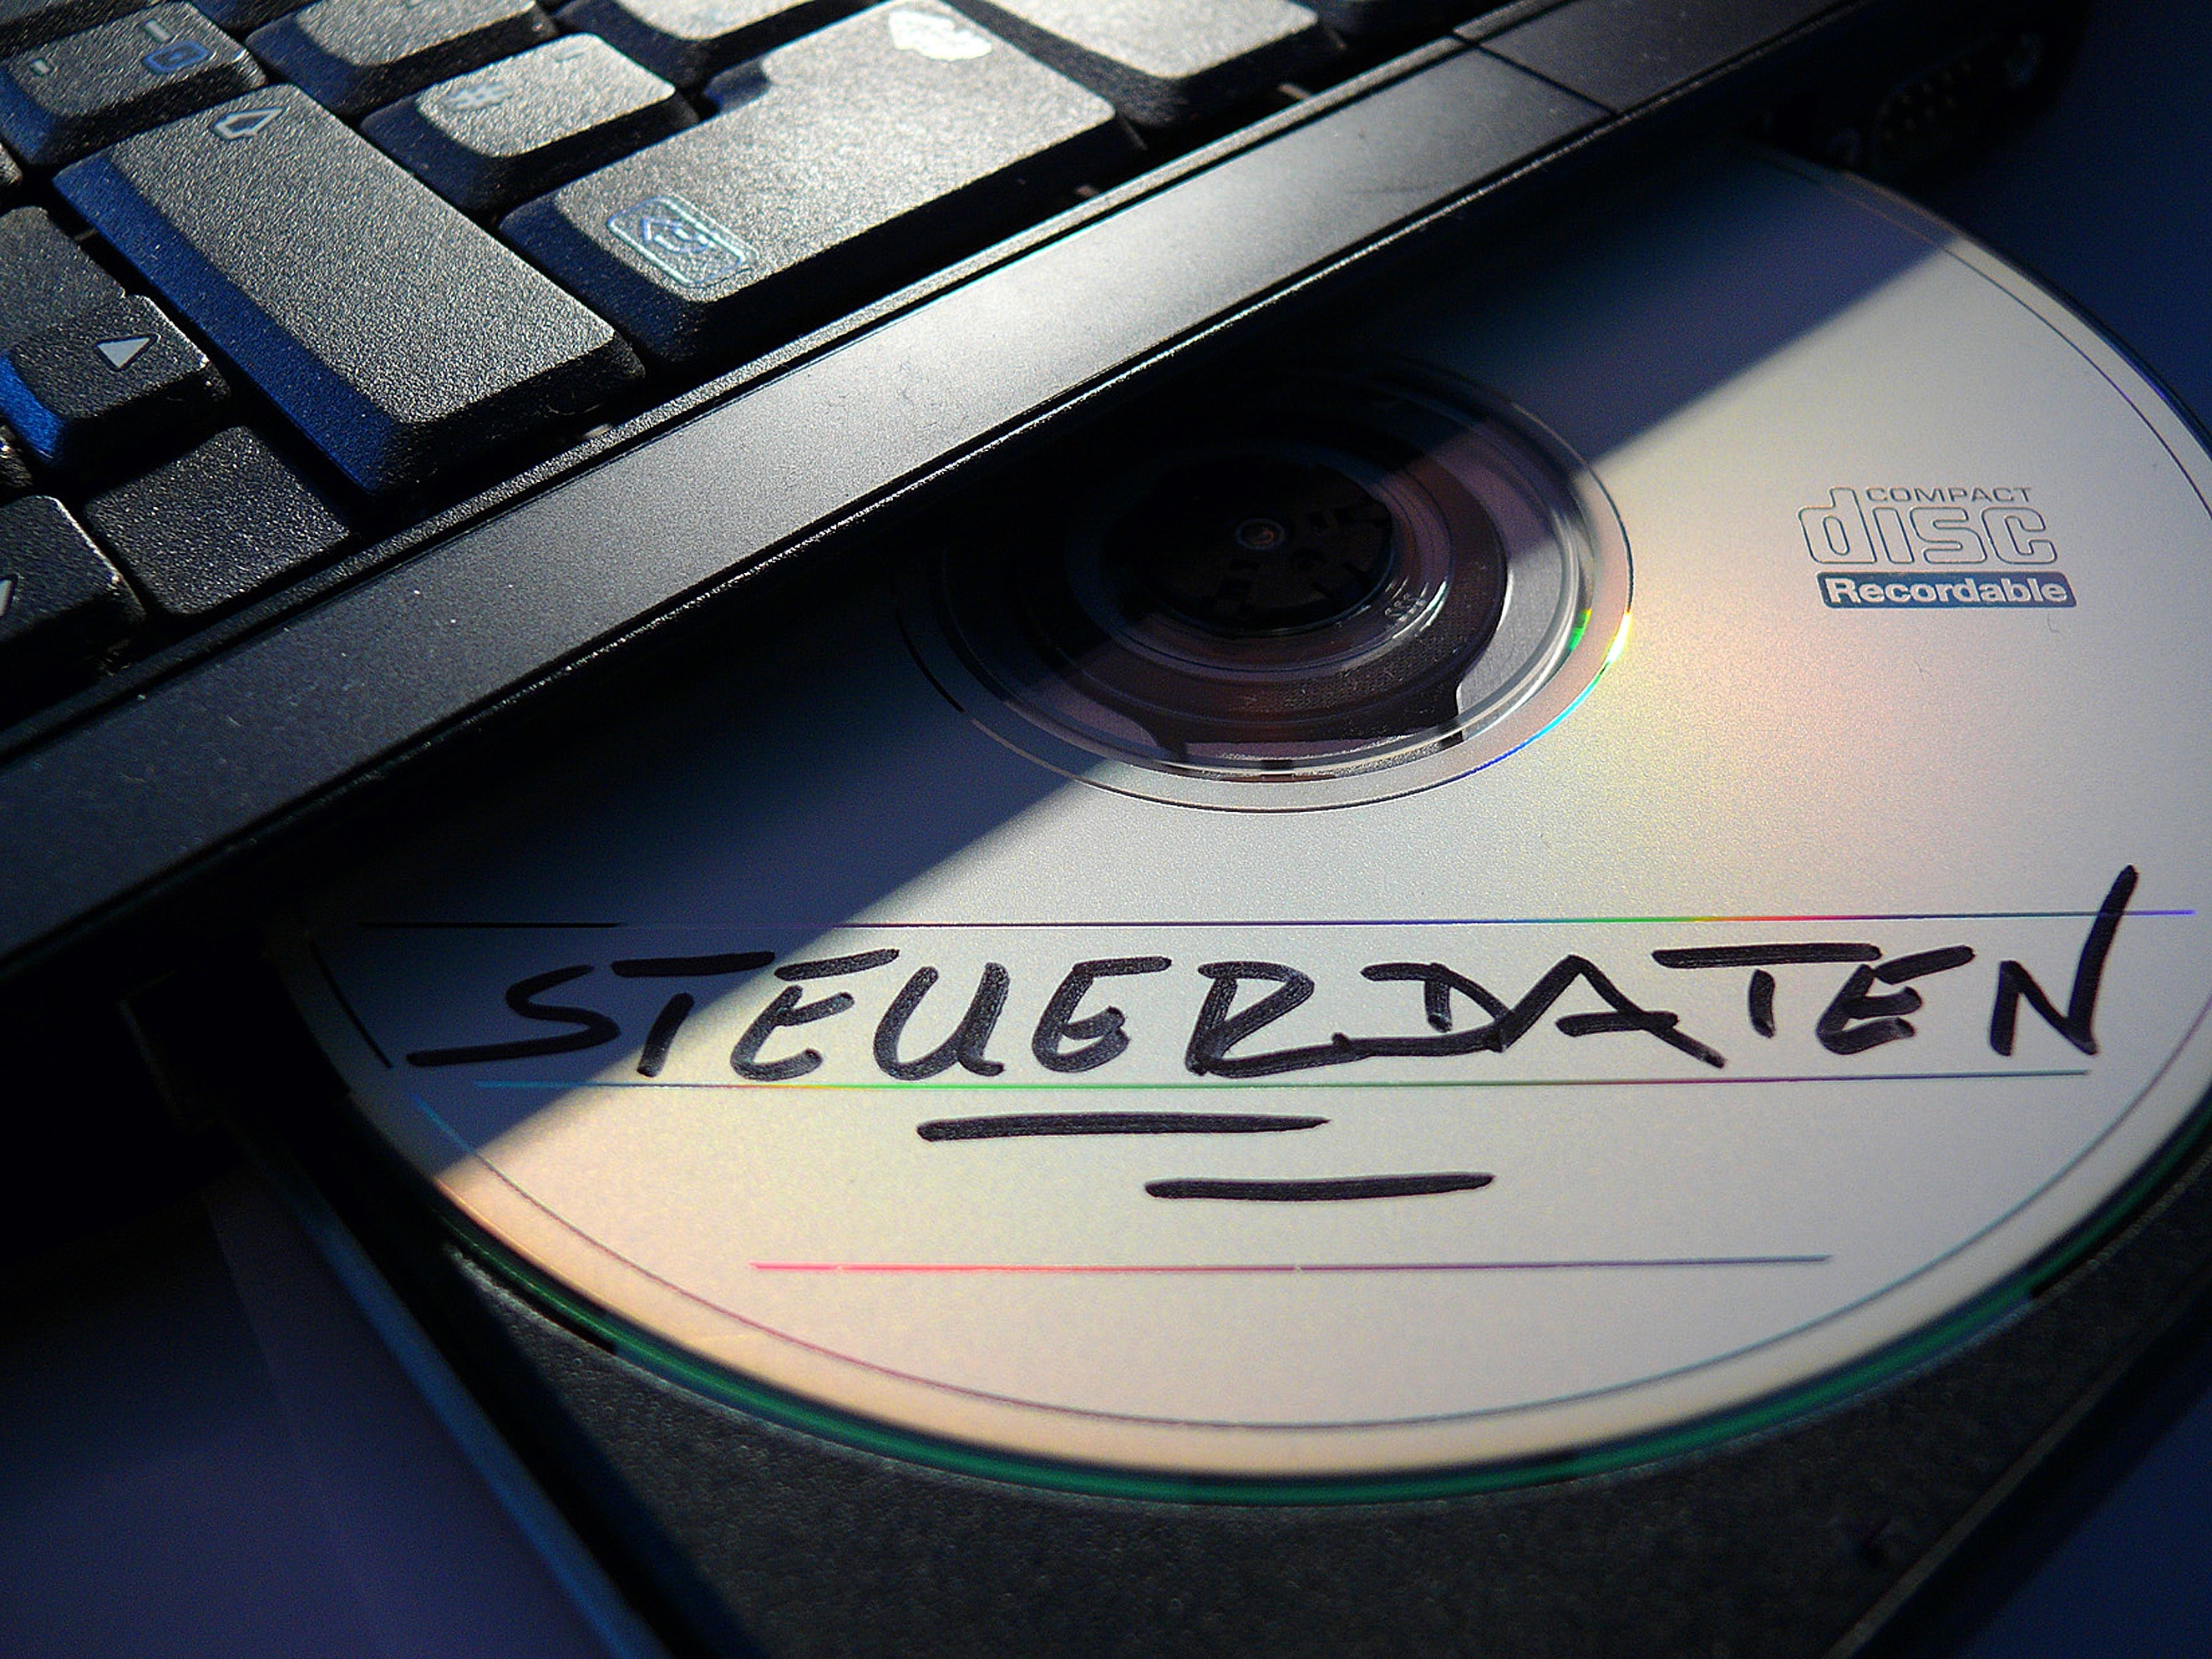 compact disc with steuerdaten text written on it on laptop optical drive